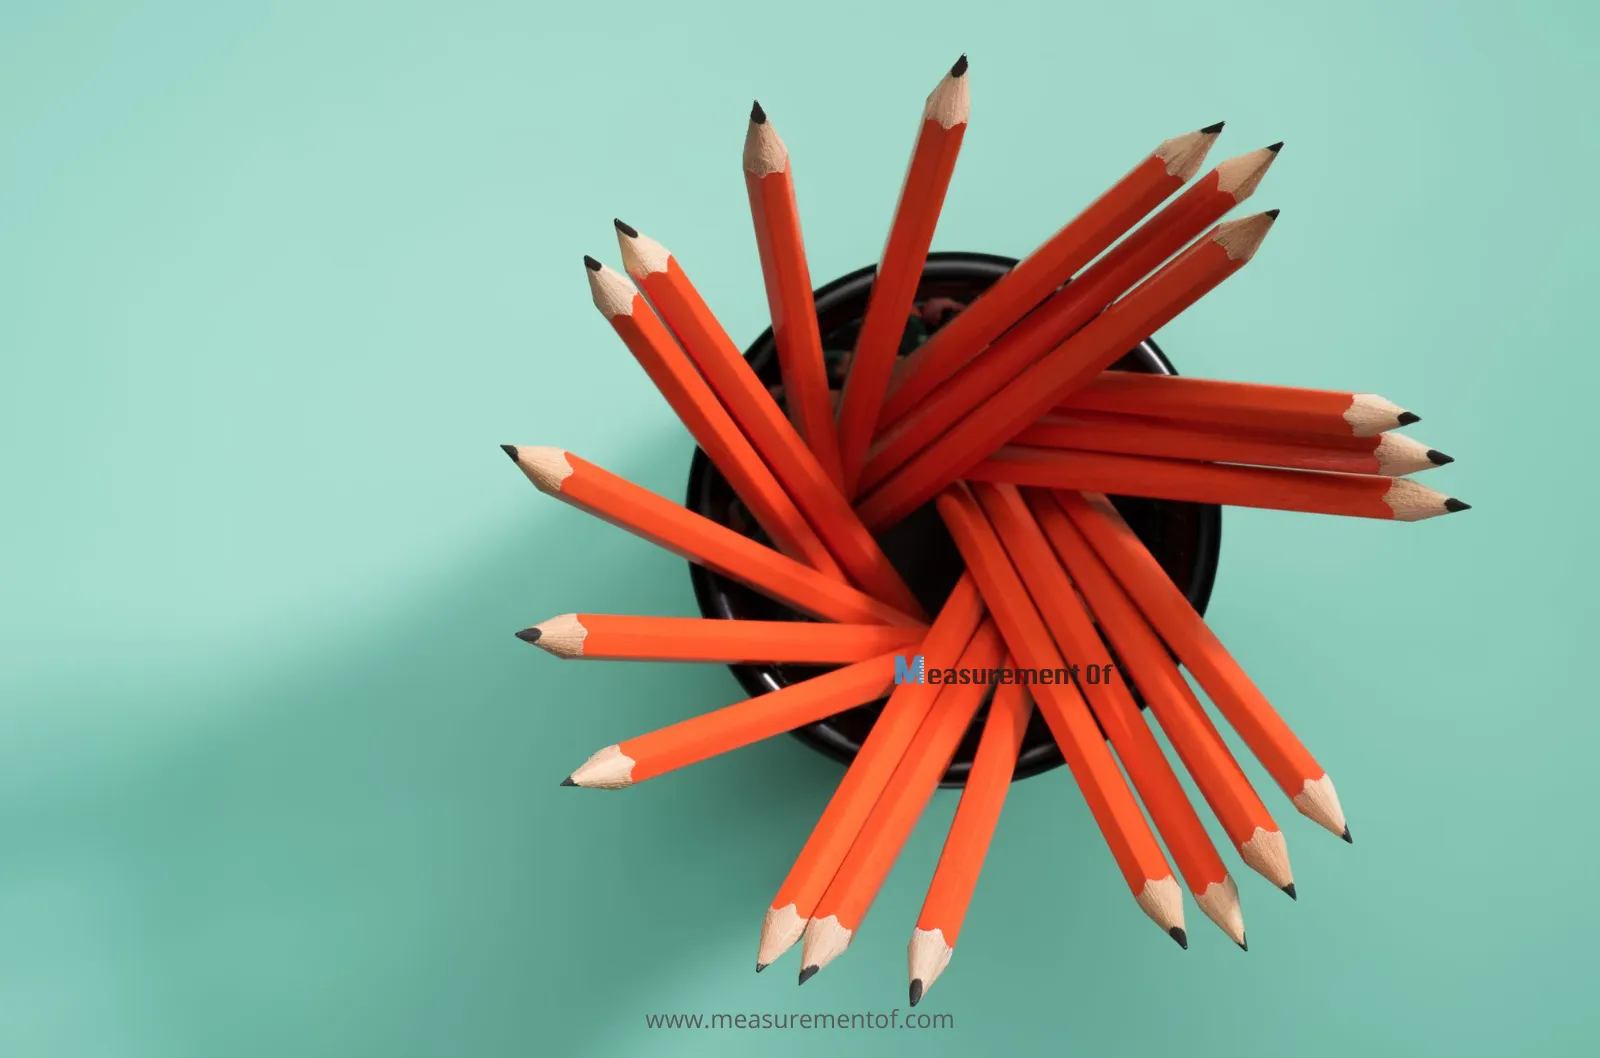 Several pencils kept in a stand